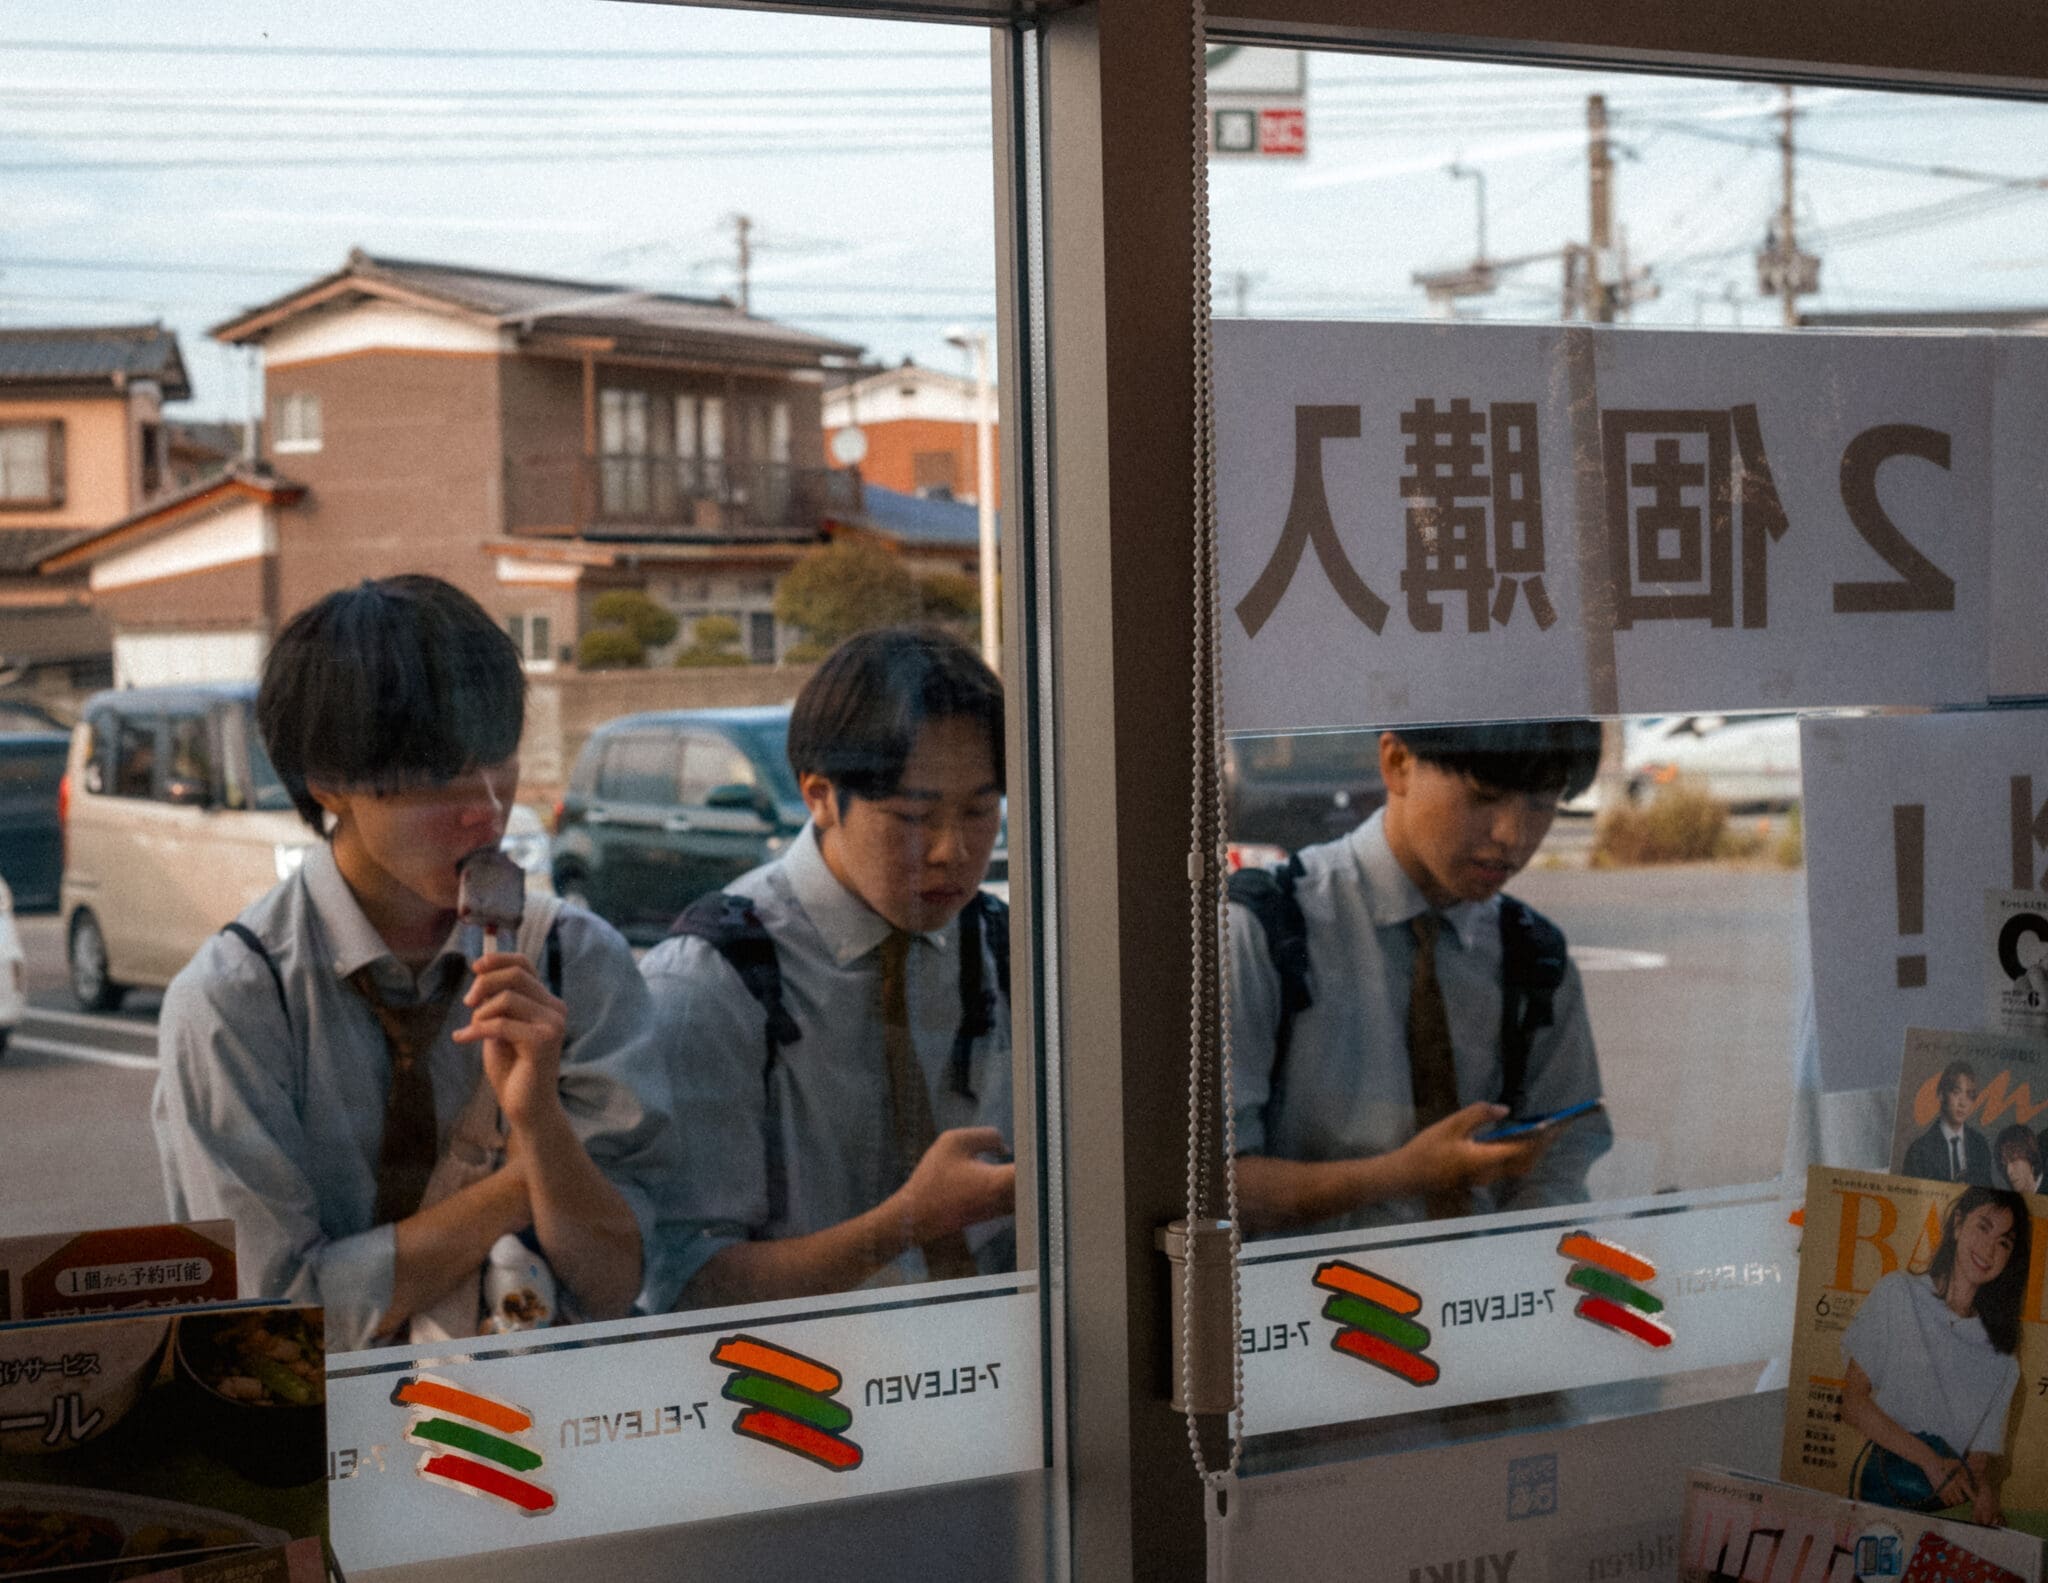 Japanese students in uniforms engage with ice cream and smartphones by a window.